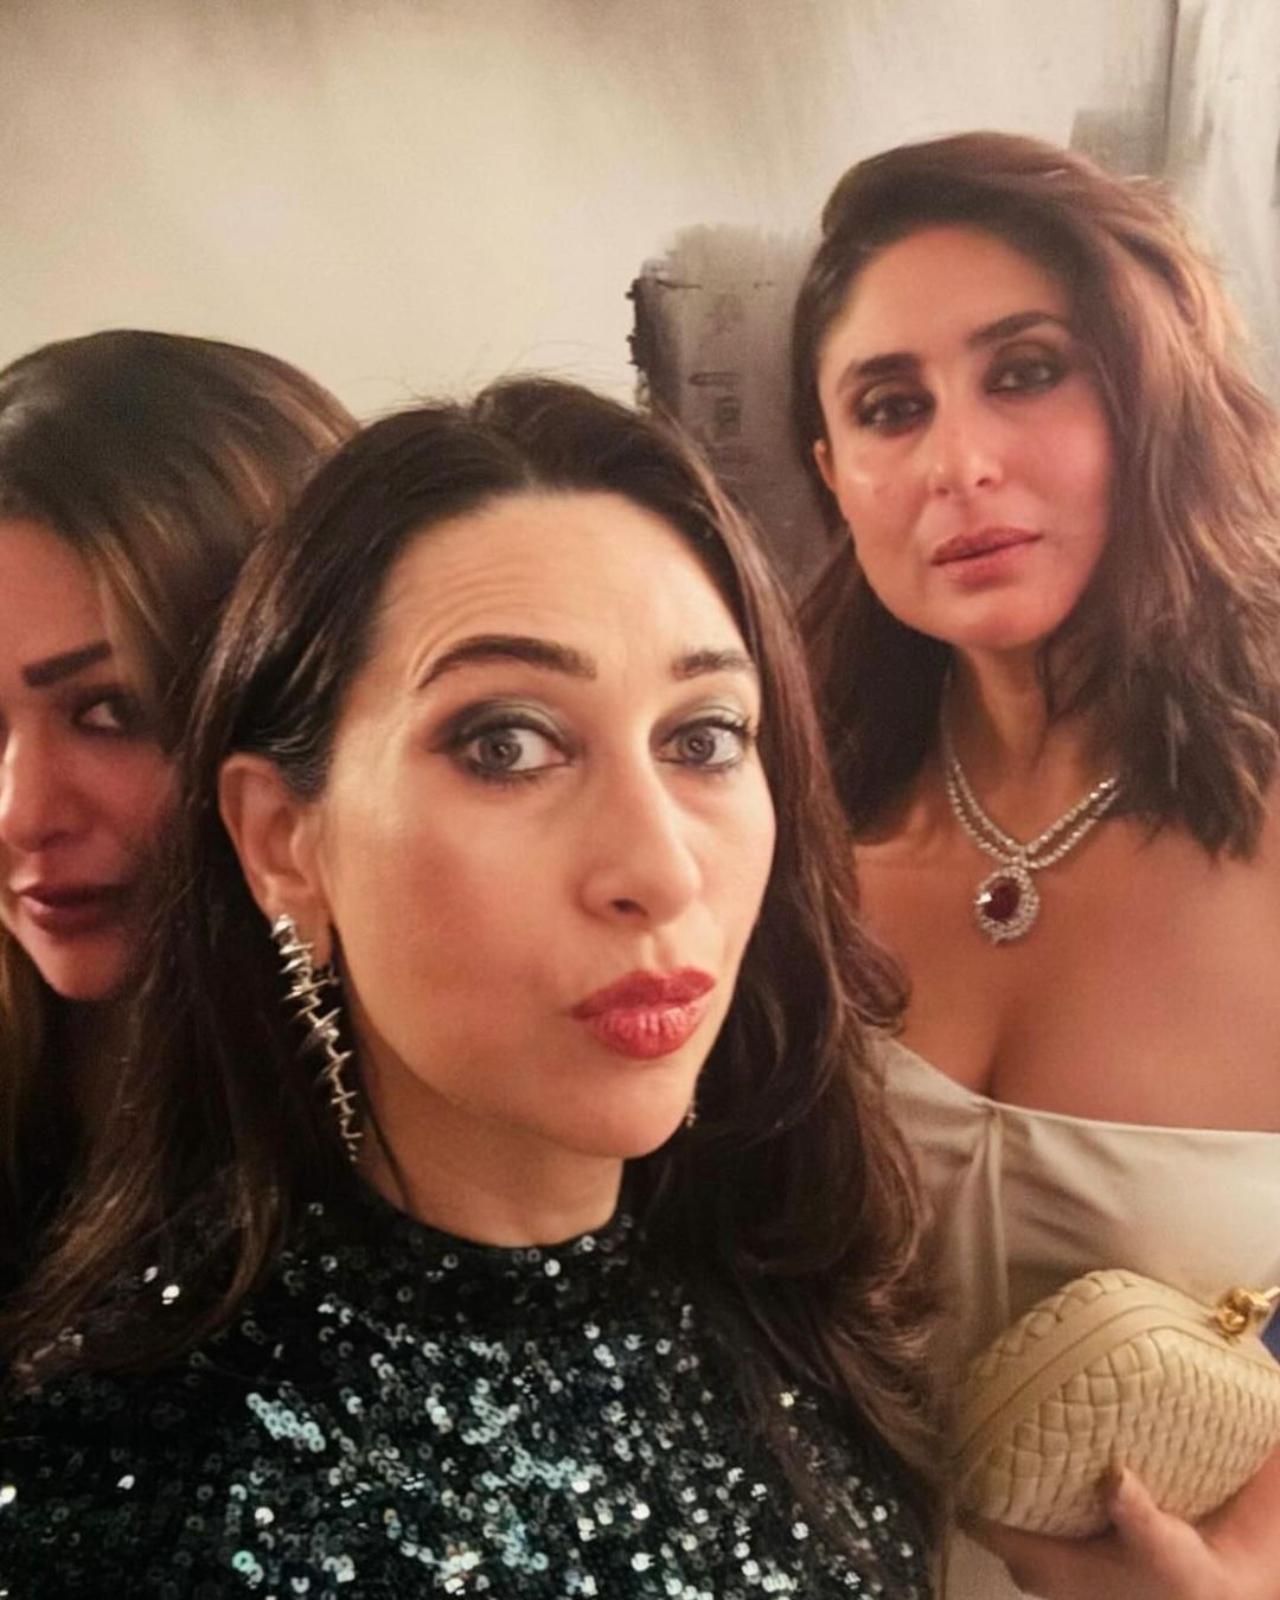 The Kapoor sisters, Karisma and Kareena, were all glammed up for the big night